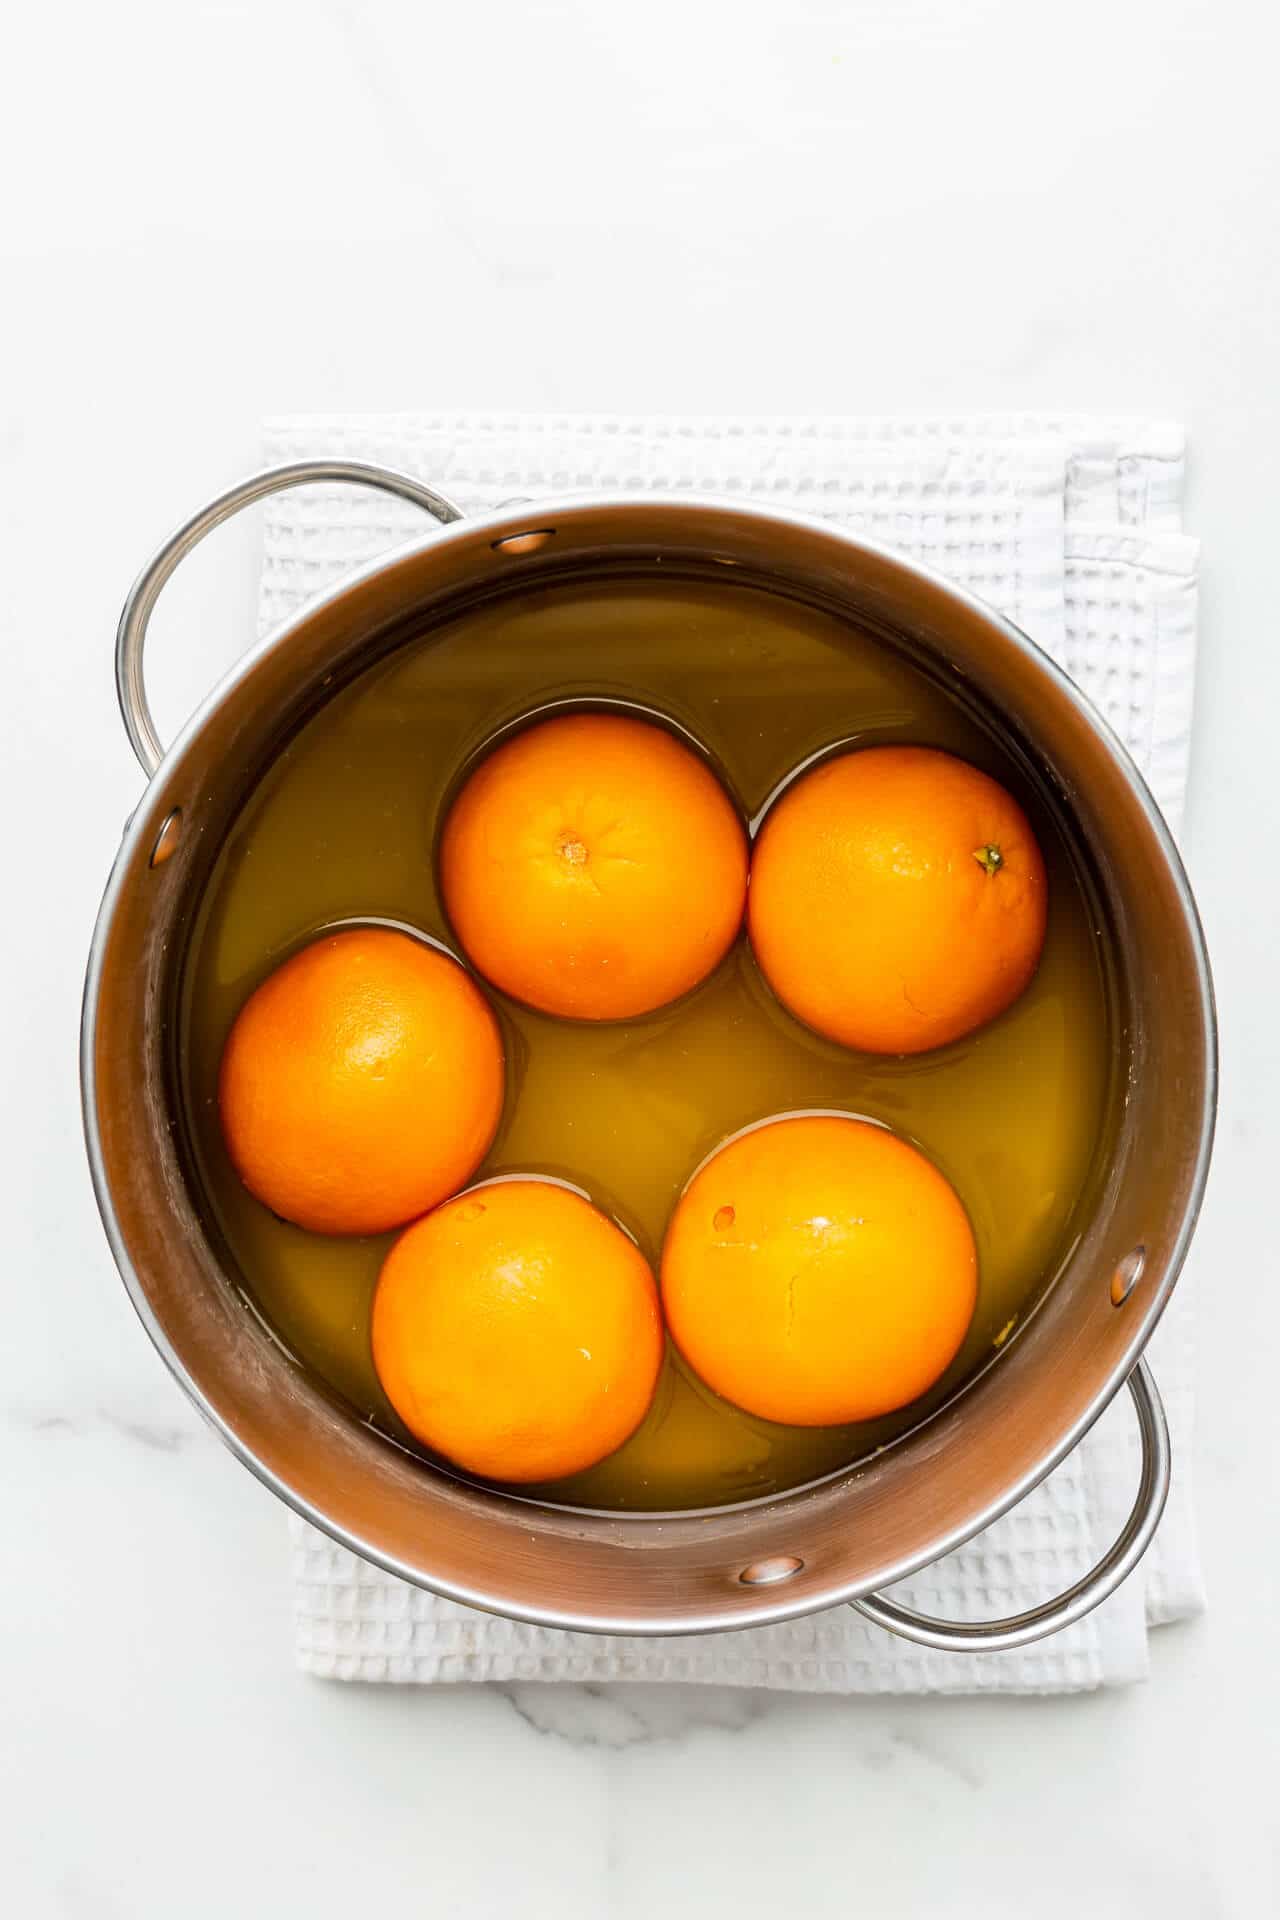 A pot of boiled oranges, ready to be sliced and transformed into orange marmalade.